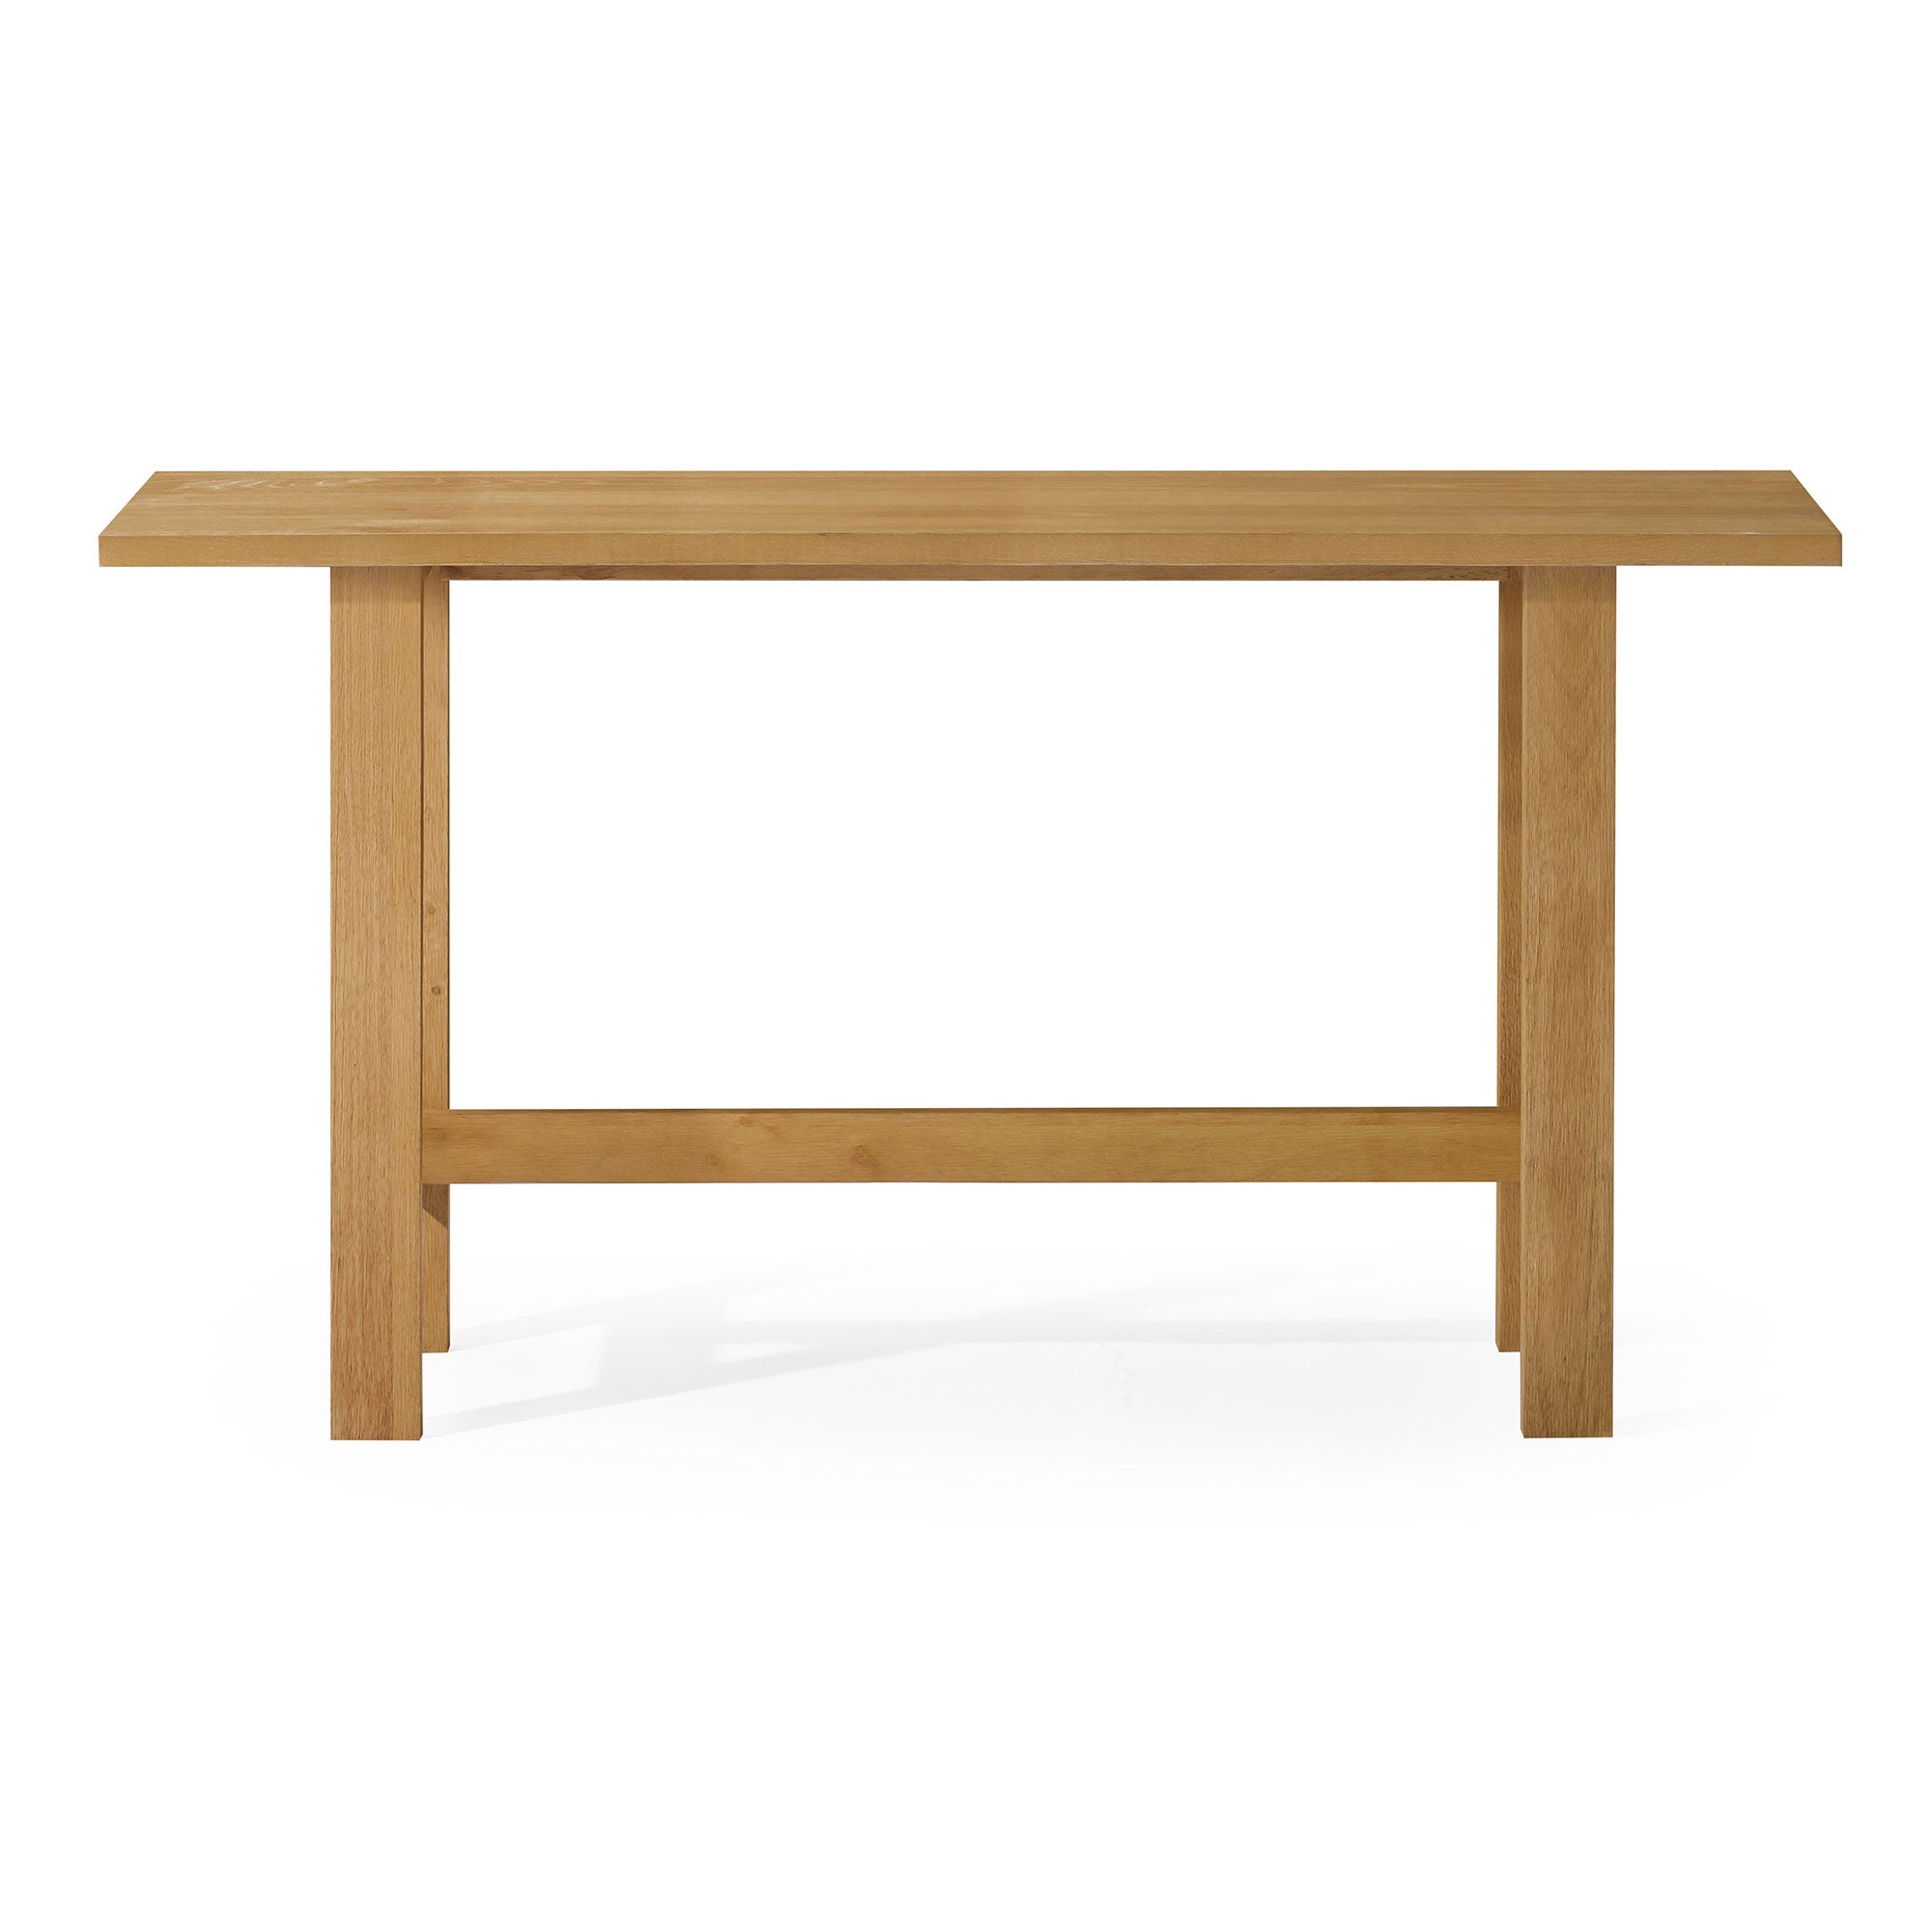 Hera Modern Wooden Console Table in Weathered Natural Finish